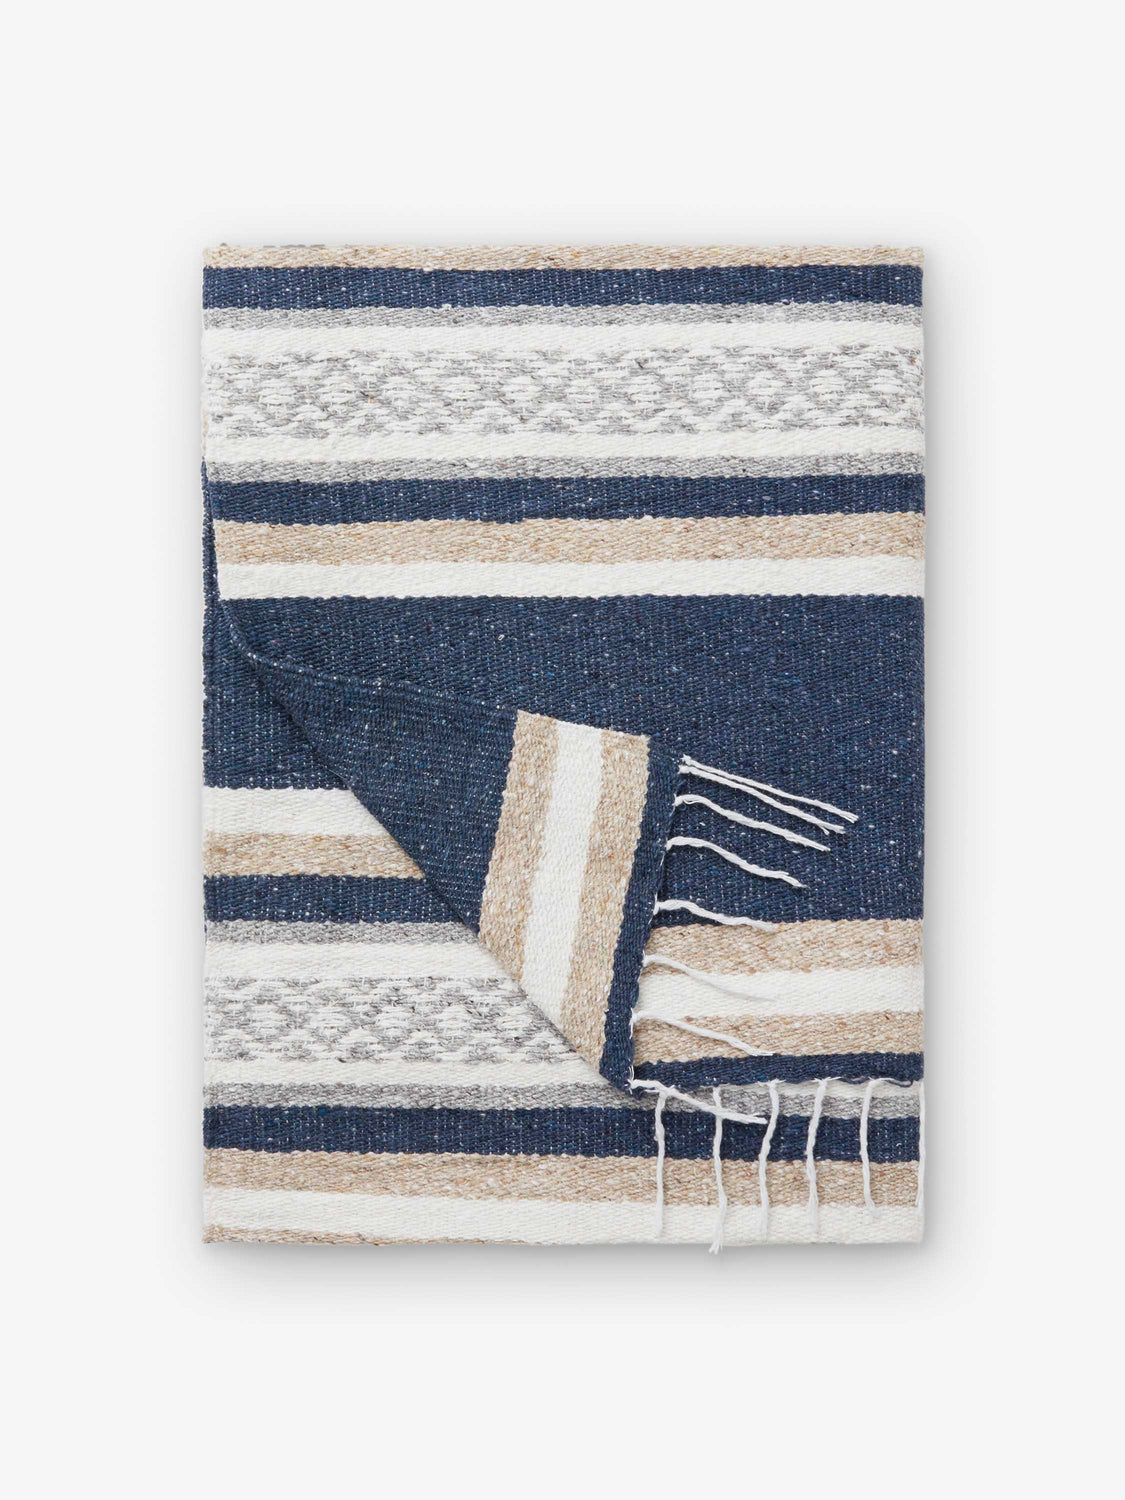 A folded traditional, hand-woven Mexican blanket in gray, tan, and white pattern with fringe.